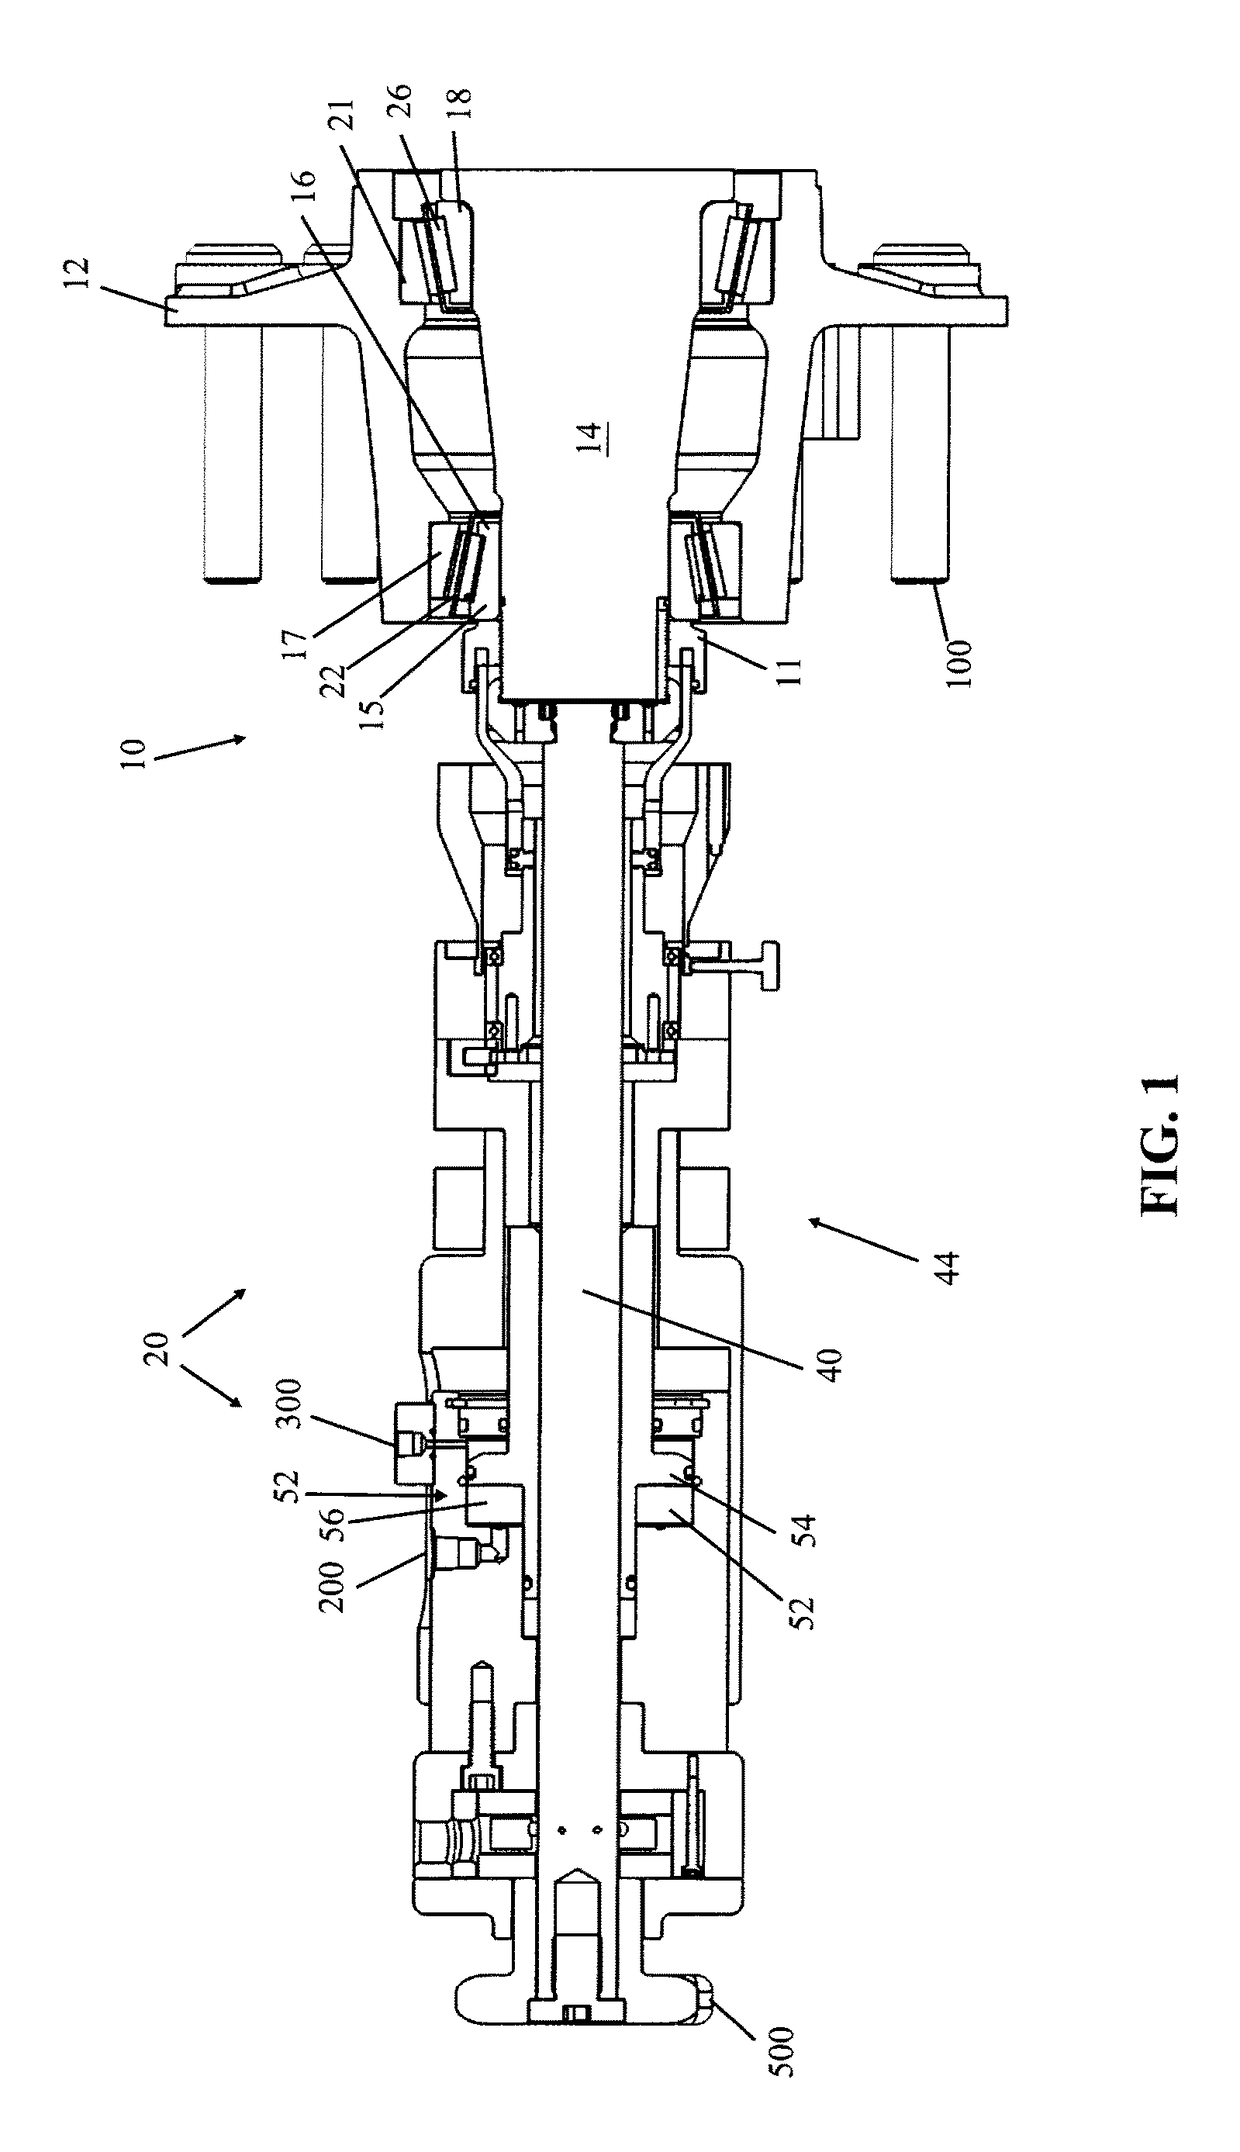 Systems and methods for preloading a bearing